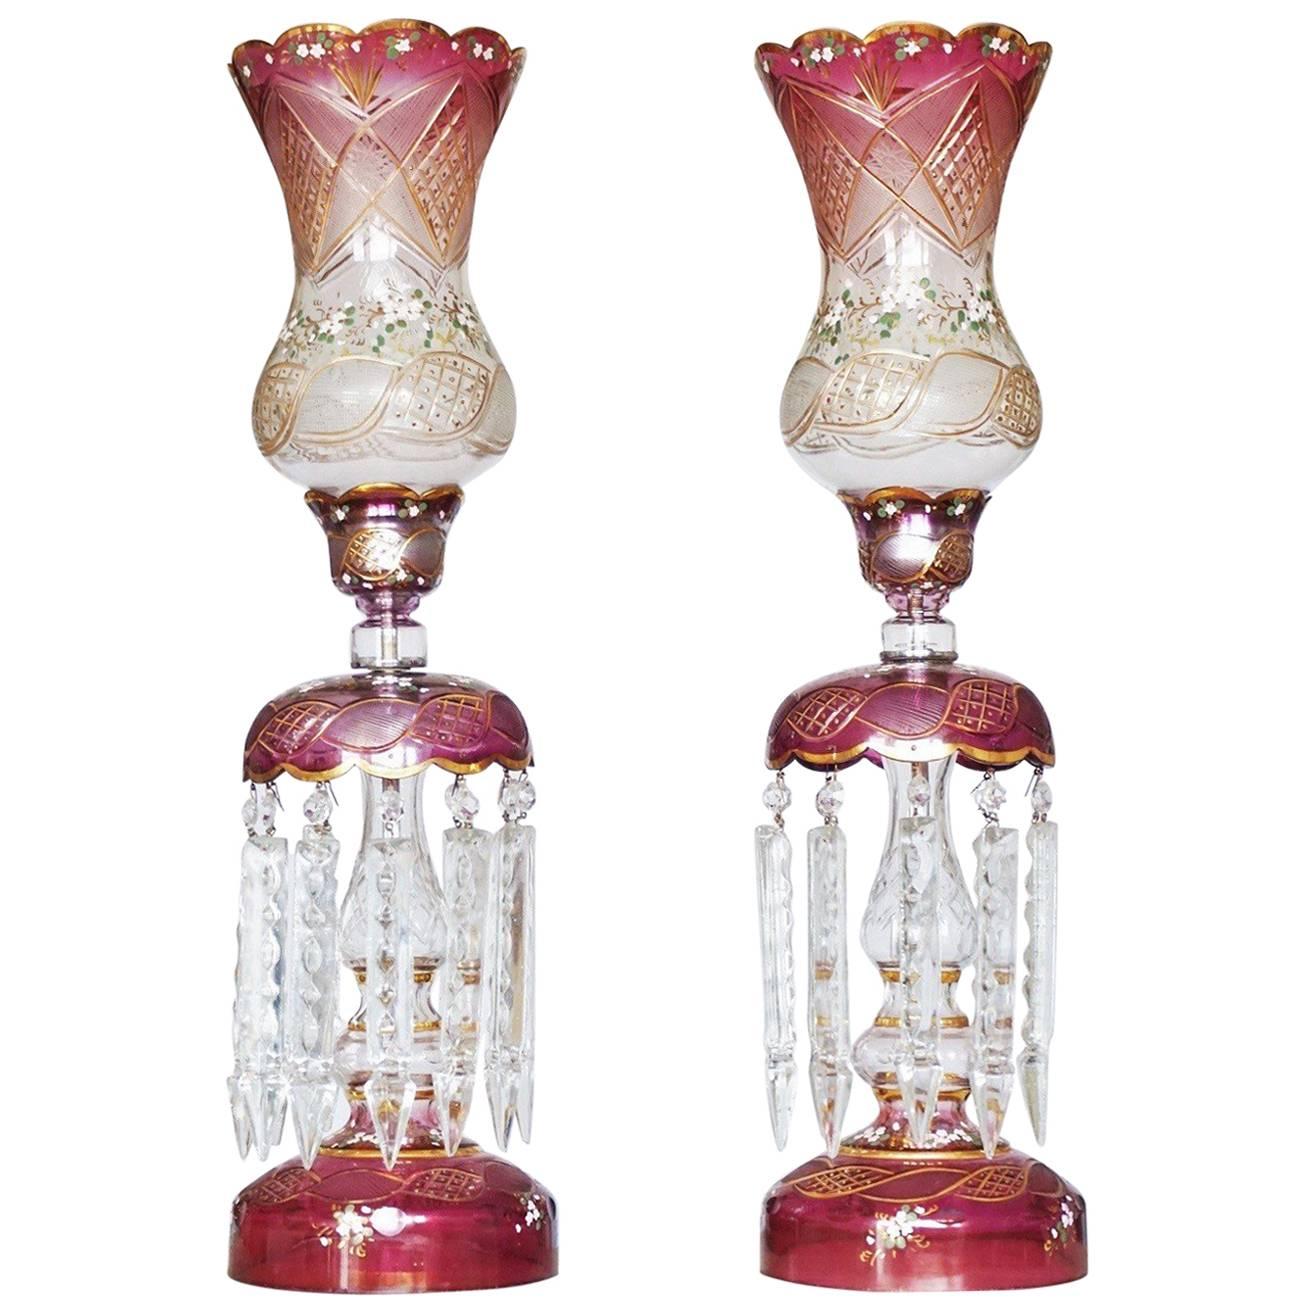 Pair of Bohemian Cranberry Cut-Glass Hand-Painted Lustres Lamps, circa 1920